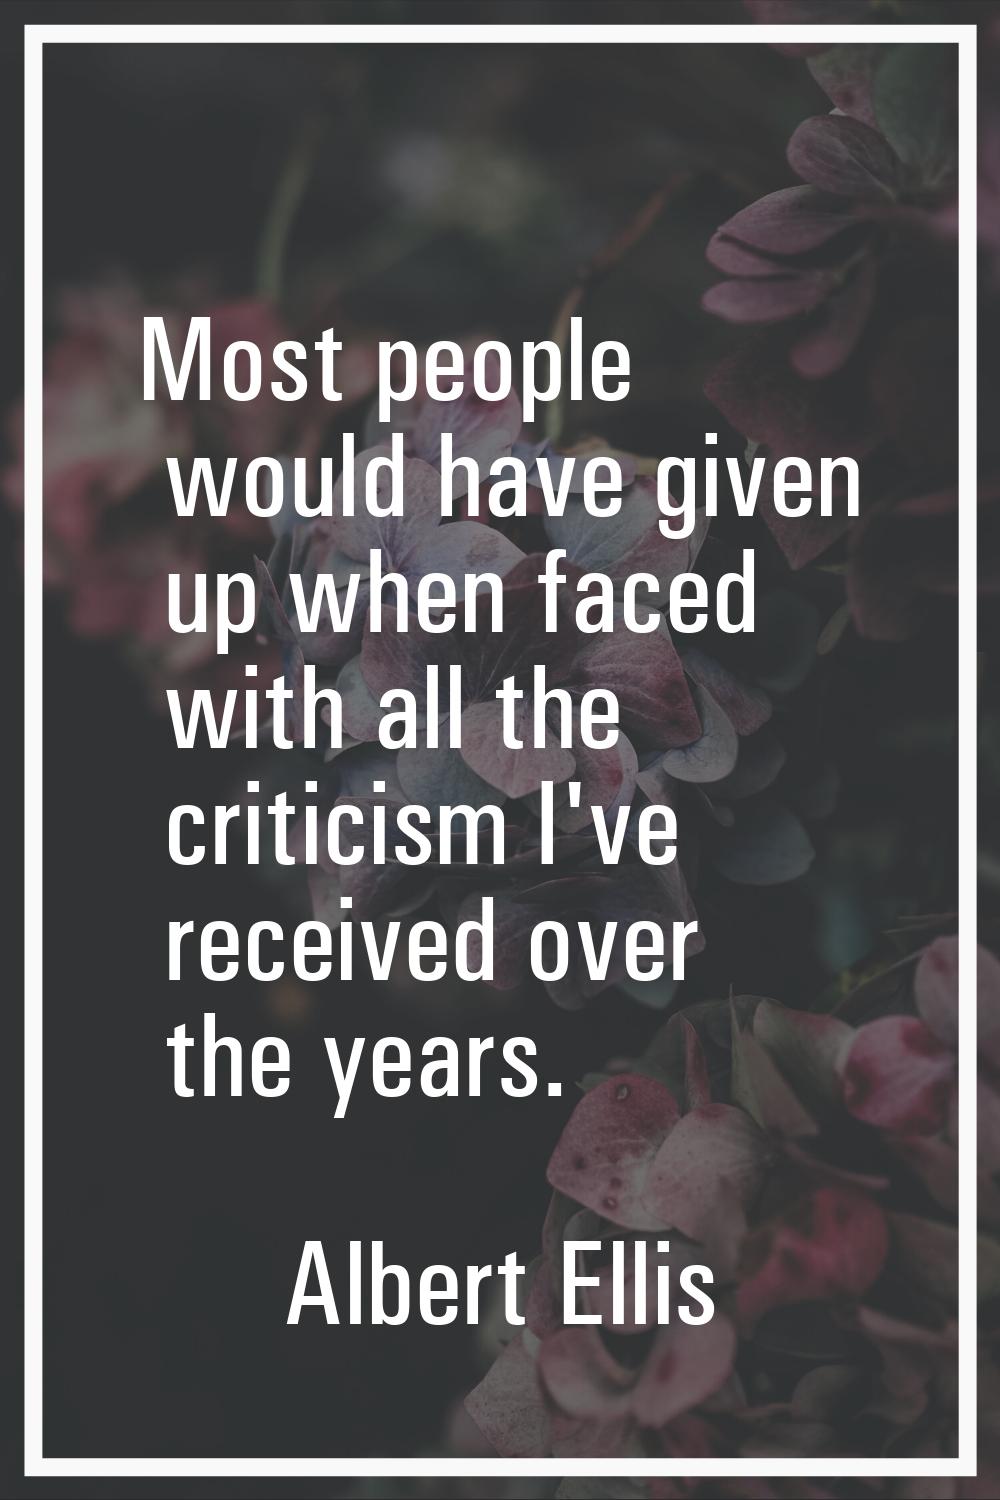 Most people would have given up when faced with all the criticism I've received over the years.